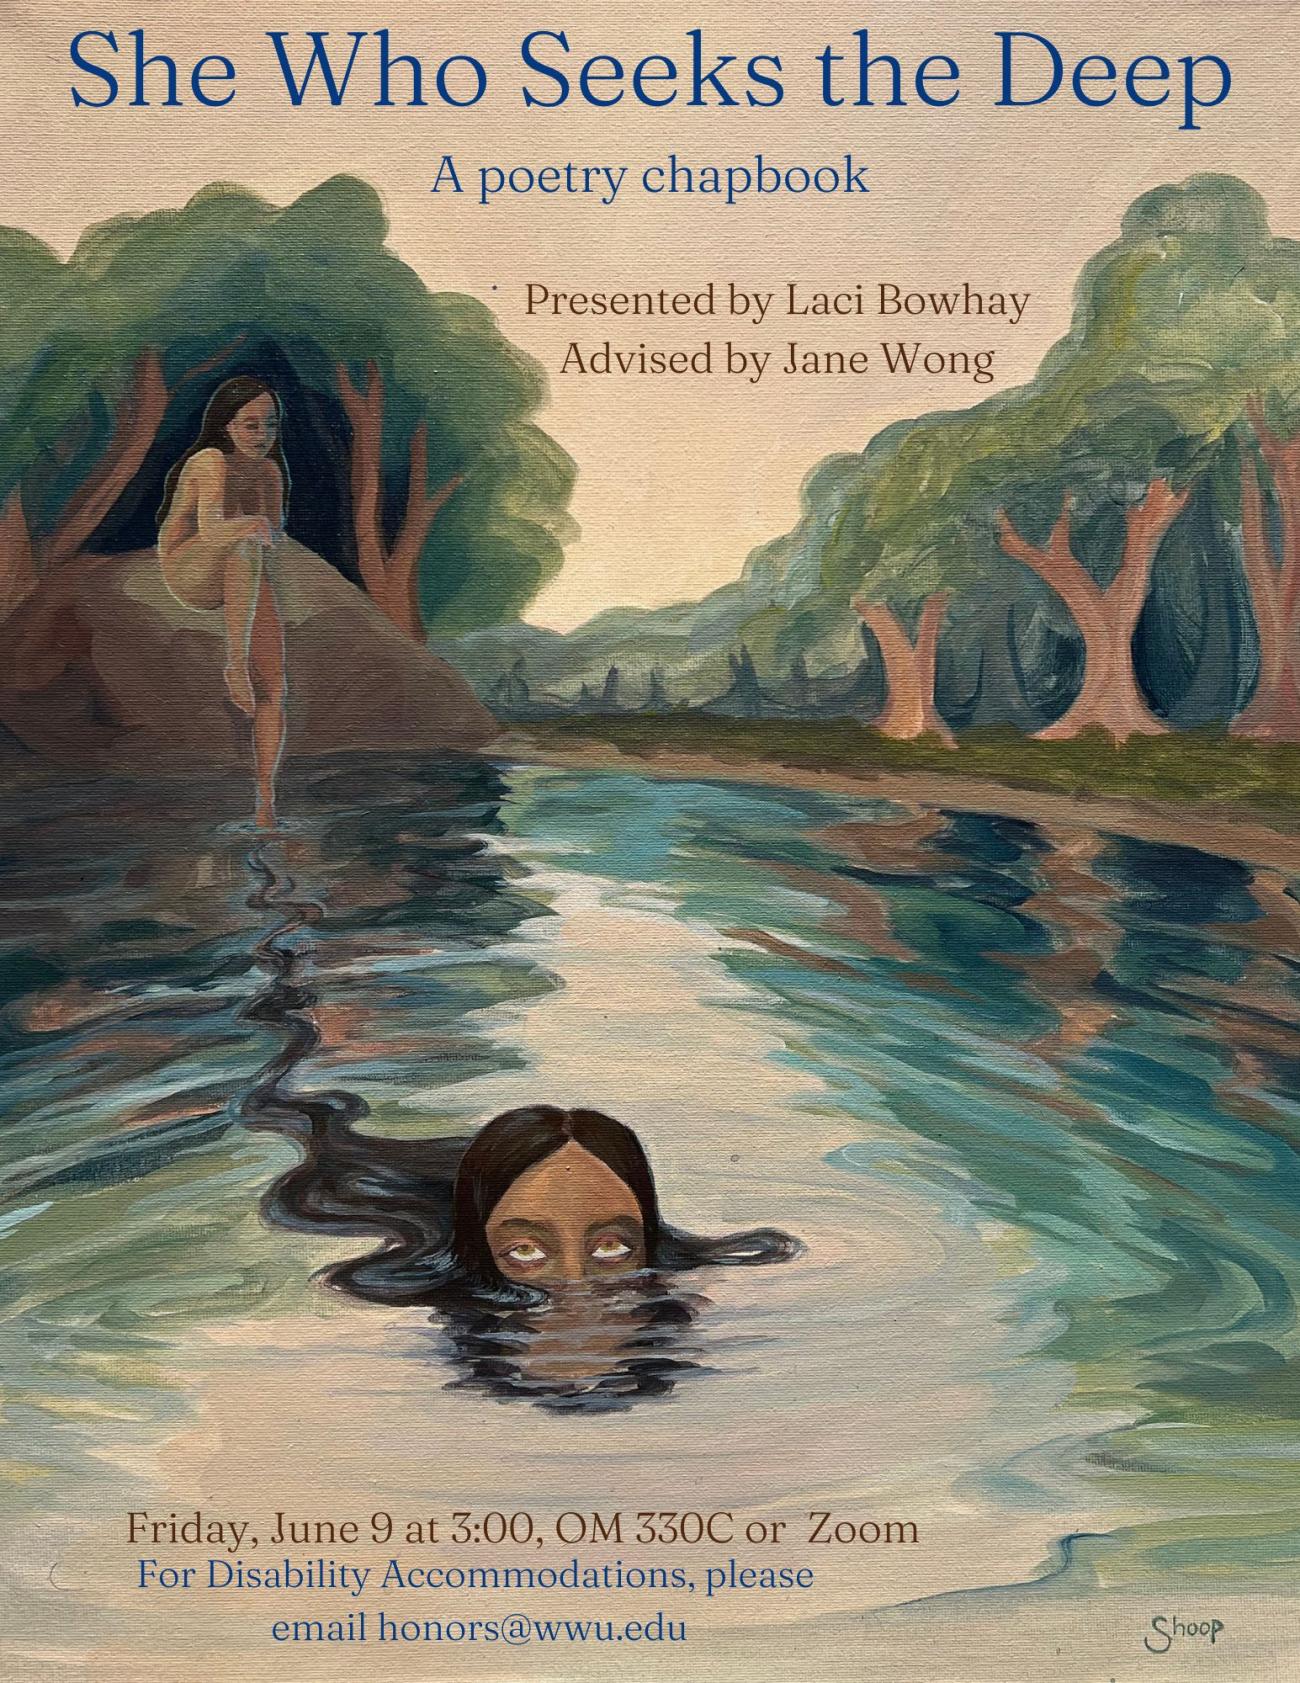 A poster with a painting of a lake with trees in the background. A naked girl sits on a rock. Another girl, a future version of her, is in the water, visible from the eyes up. Her brown hair extends behind her and connects her to the girl on the rock. Text at the top reads: "She Who Seeks the Deep: A poetry Chapbook. Presented by Laci Bowhay, Advised by Jane Wong. Friday, June 9 at 3:00 OM 330C or Zoom. For Disability Accommodations please email honors@wwu.edu."